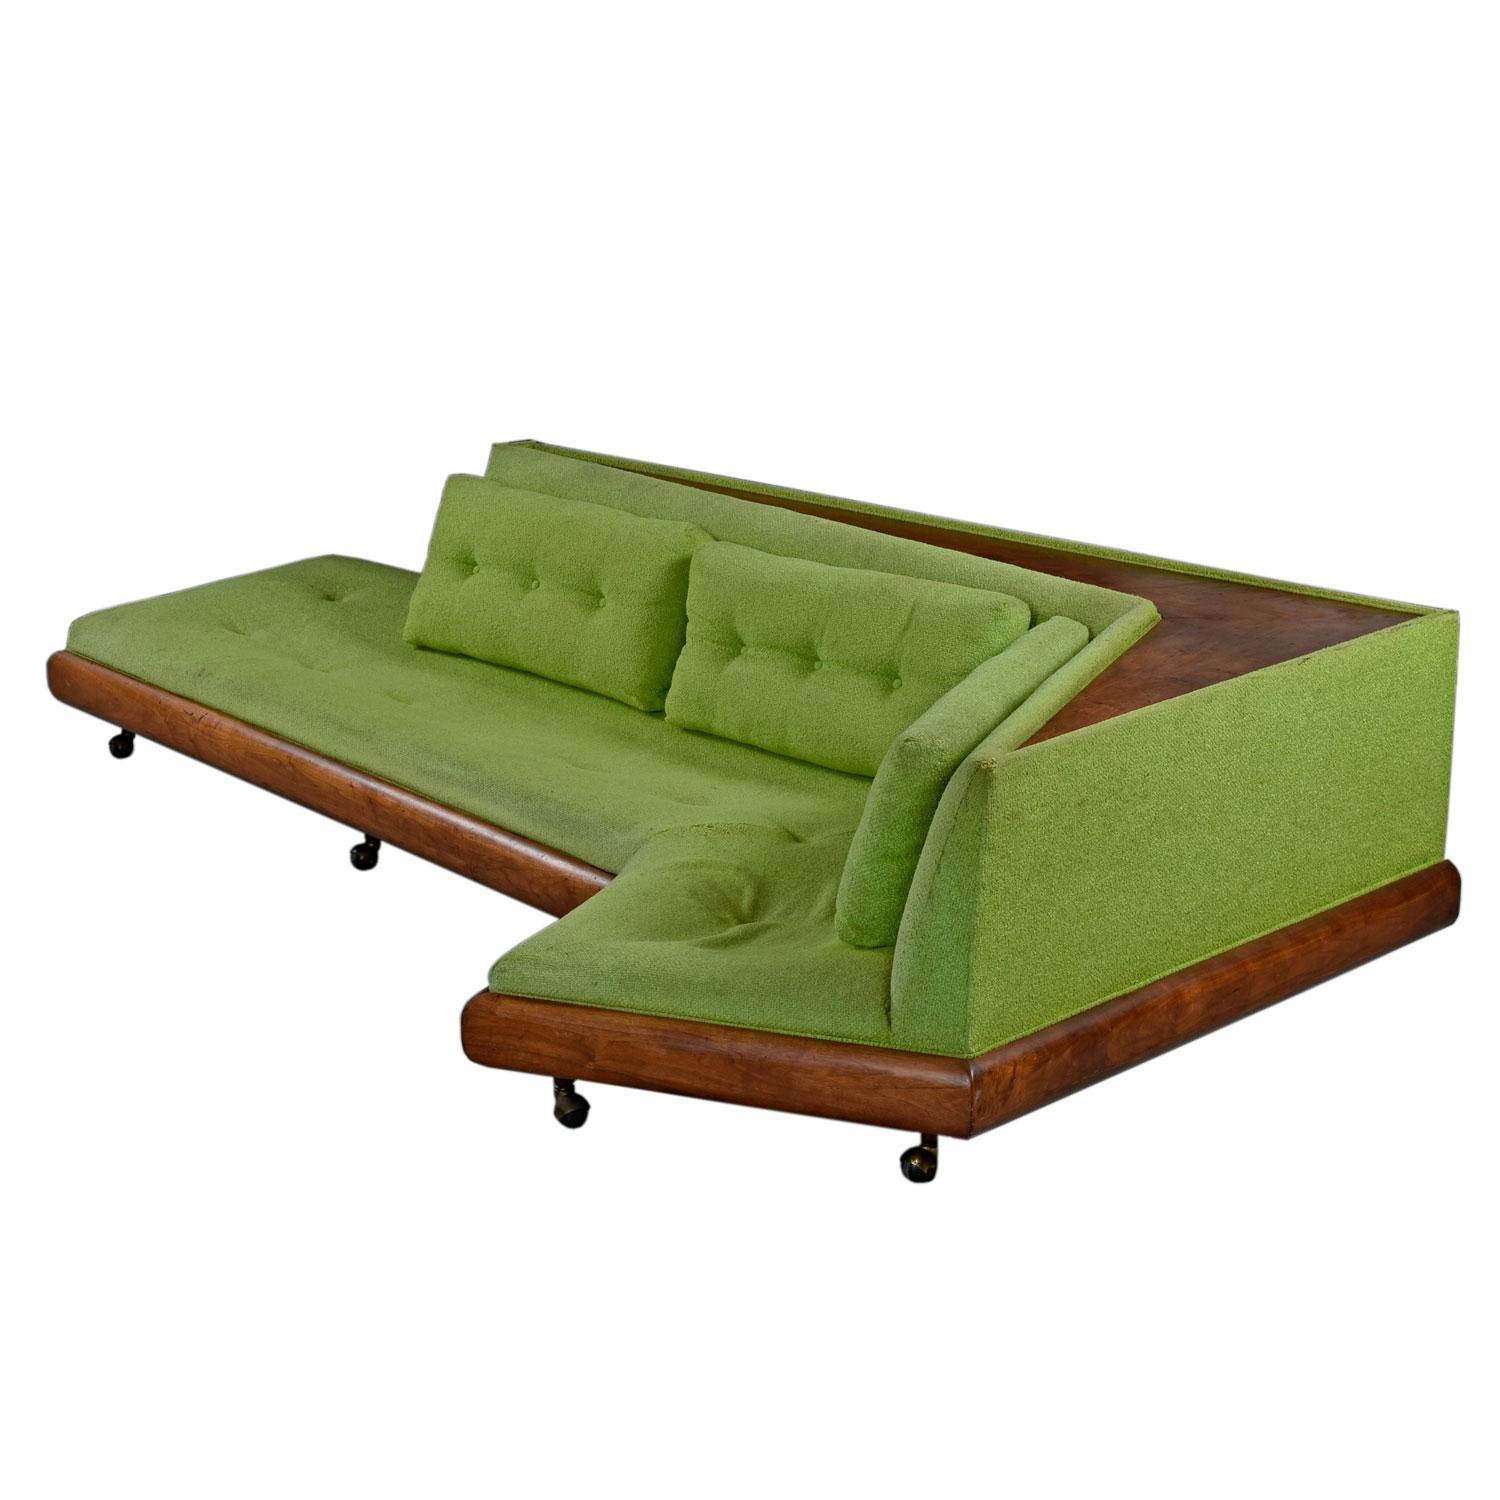 Our workshops are backed up, so we're offering this magnificent sofa at wholesale to allow buyer to invest in the restoration. Designers & decorators have a unique opportunity to customize this iconic sofa without compromise for their clients. We've